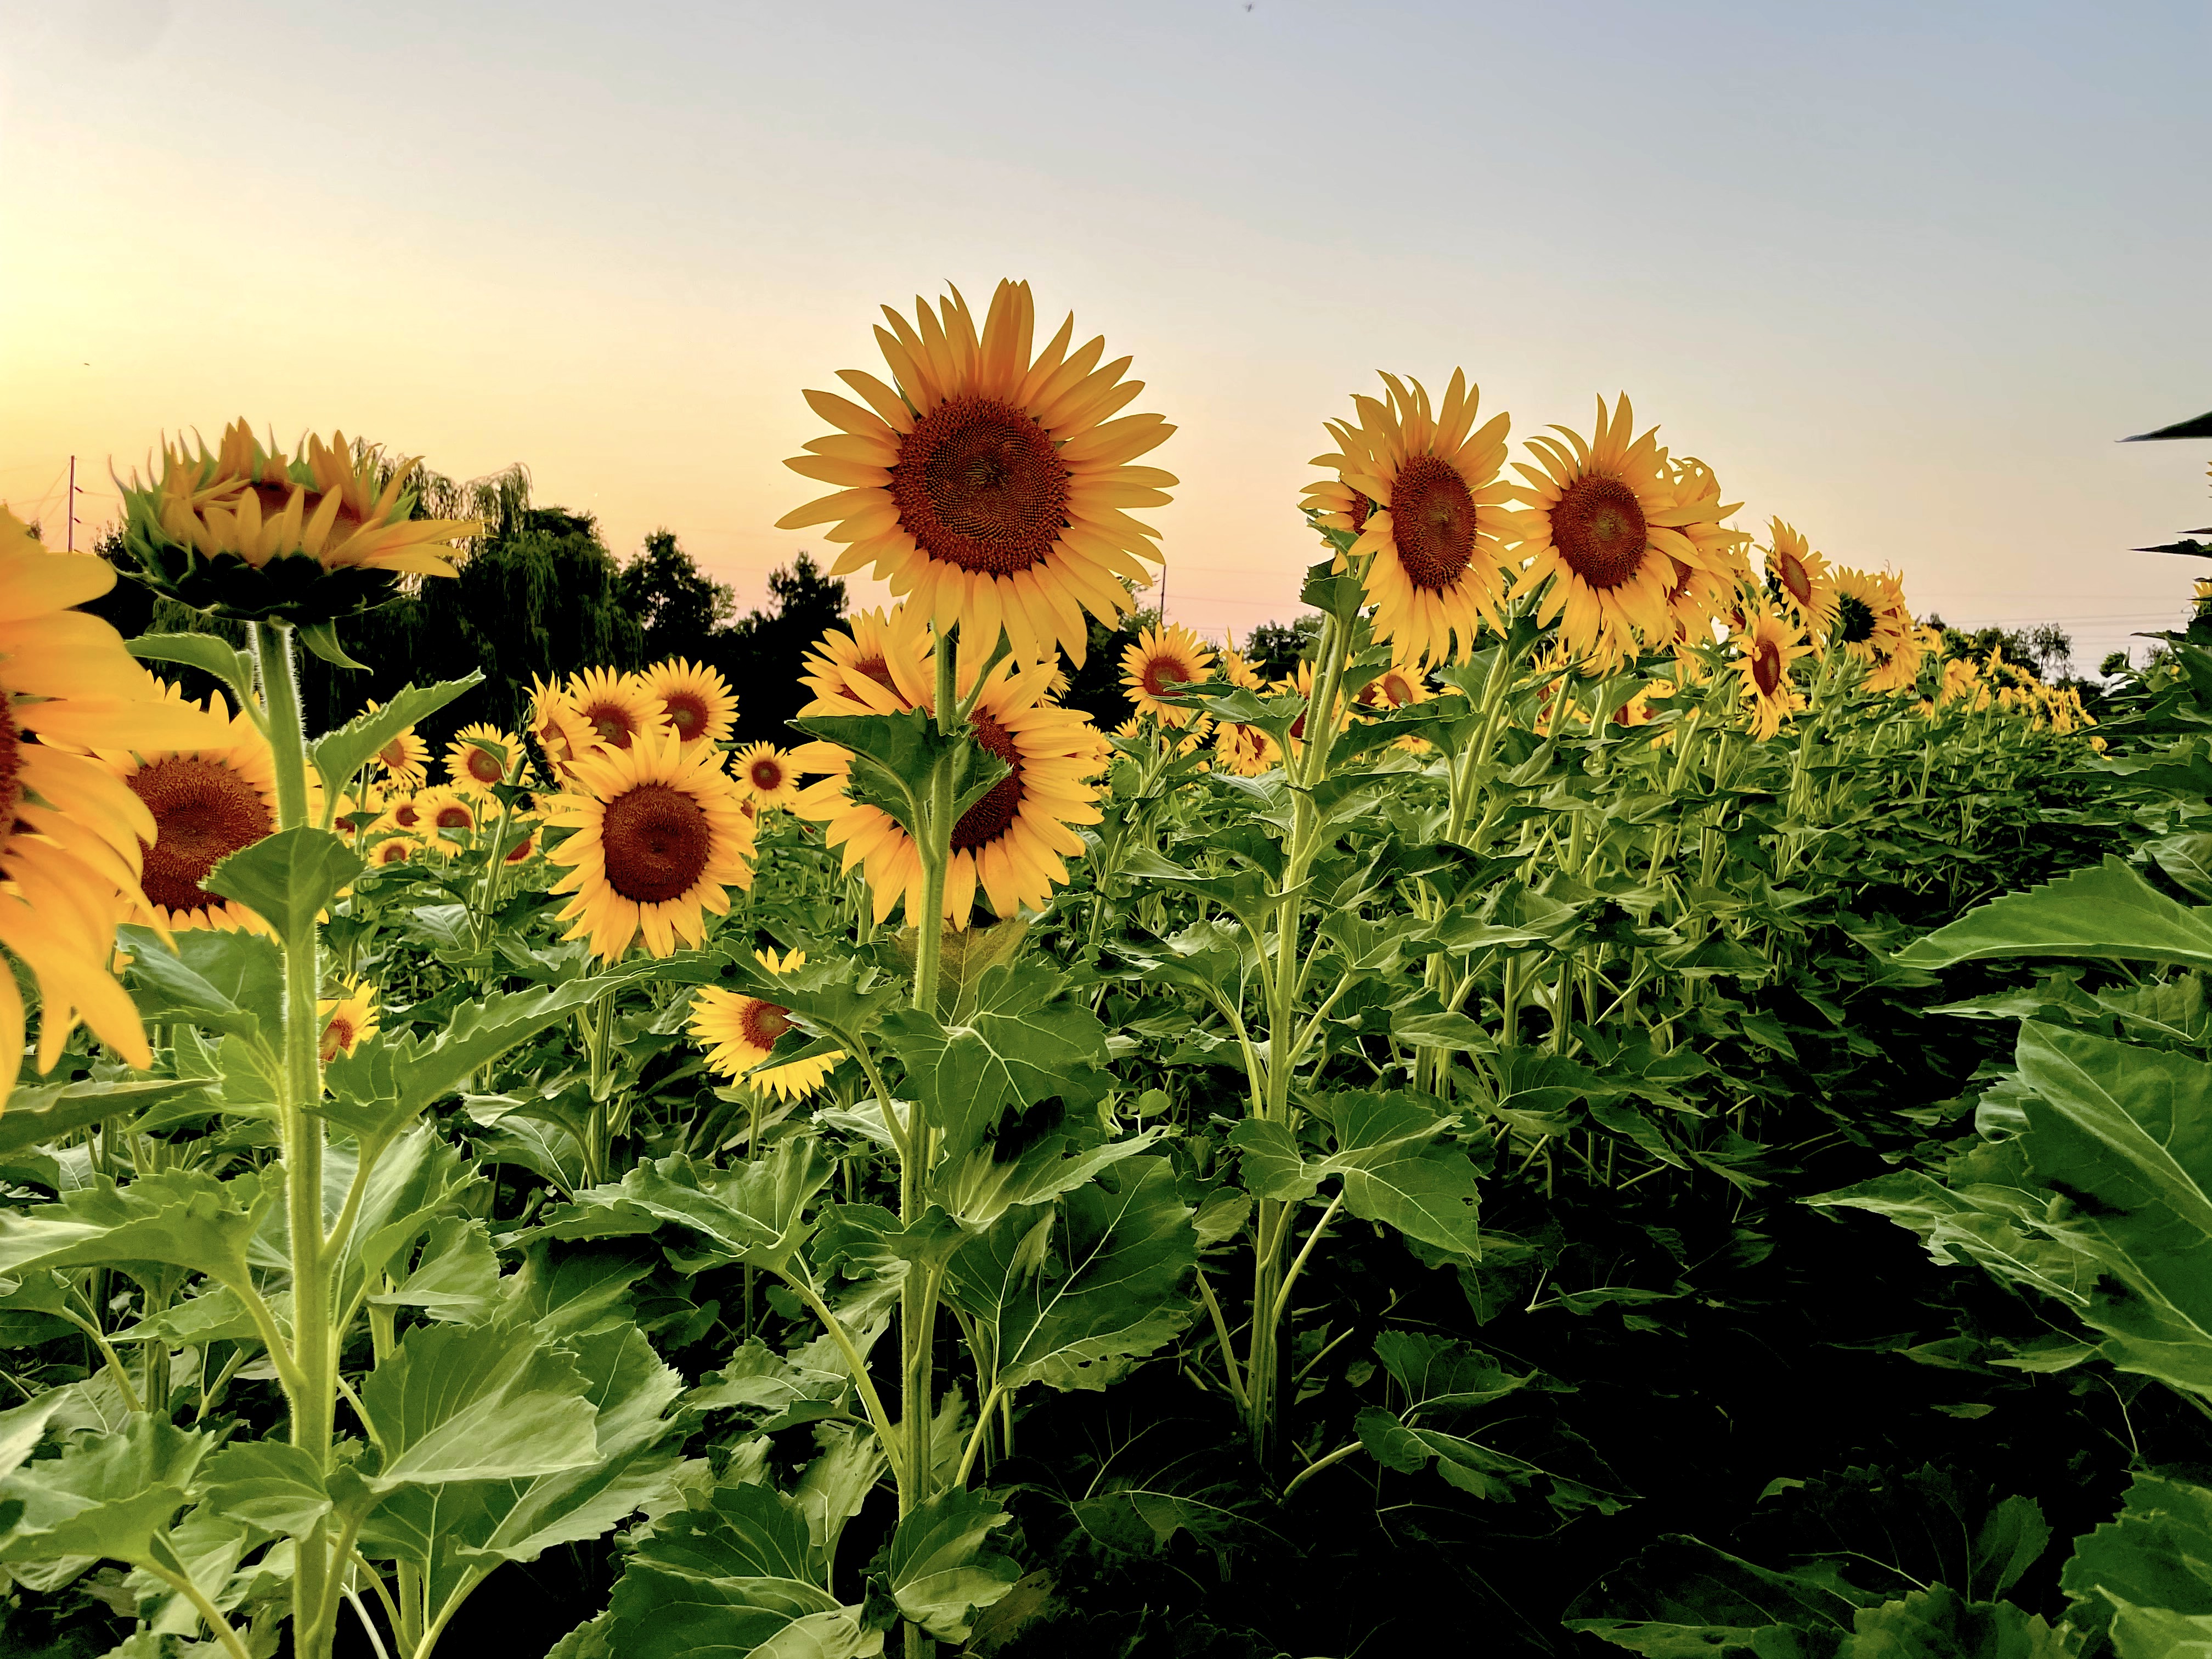 With their massive seed heads turned to the sun, sunflowers grown in northeastern Missouri are used to make sunflower seed oil, a highly sought-after cooking oil that is in short supply worldwide. Photo courtesy of Amberlyn Brown.